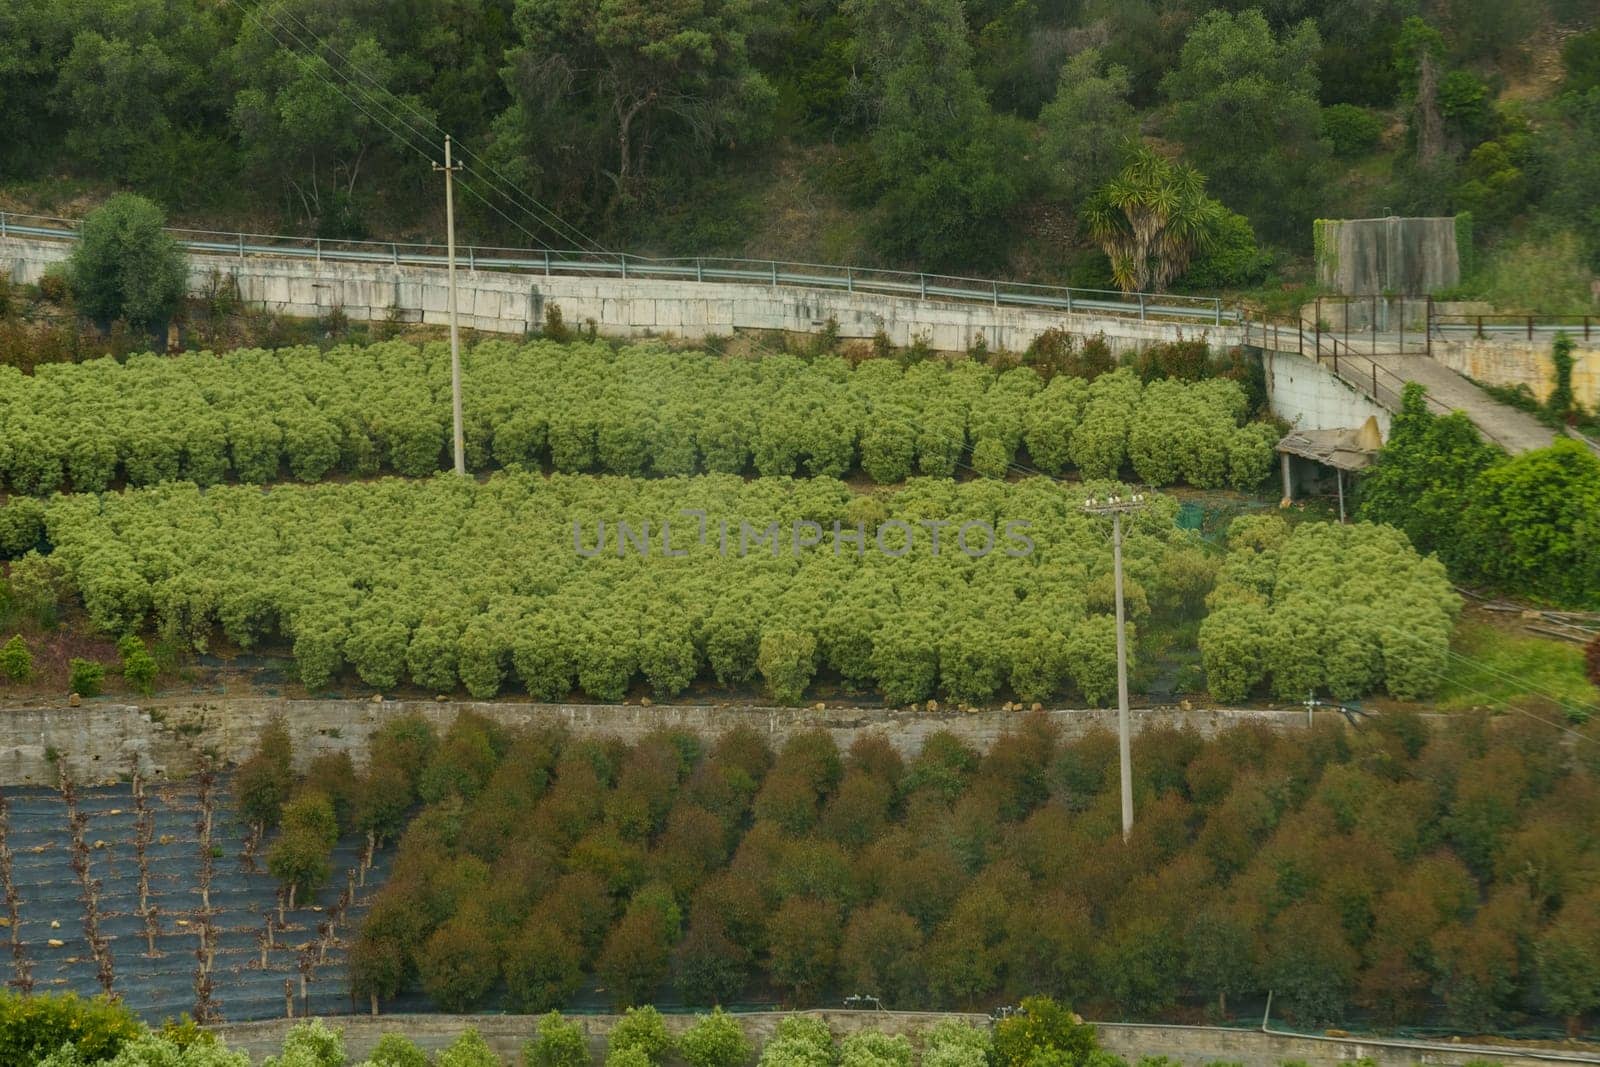 An aerial view of an agricultural hillside with rows of fruit trees growing in a green garden.